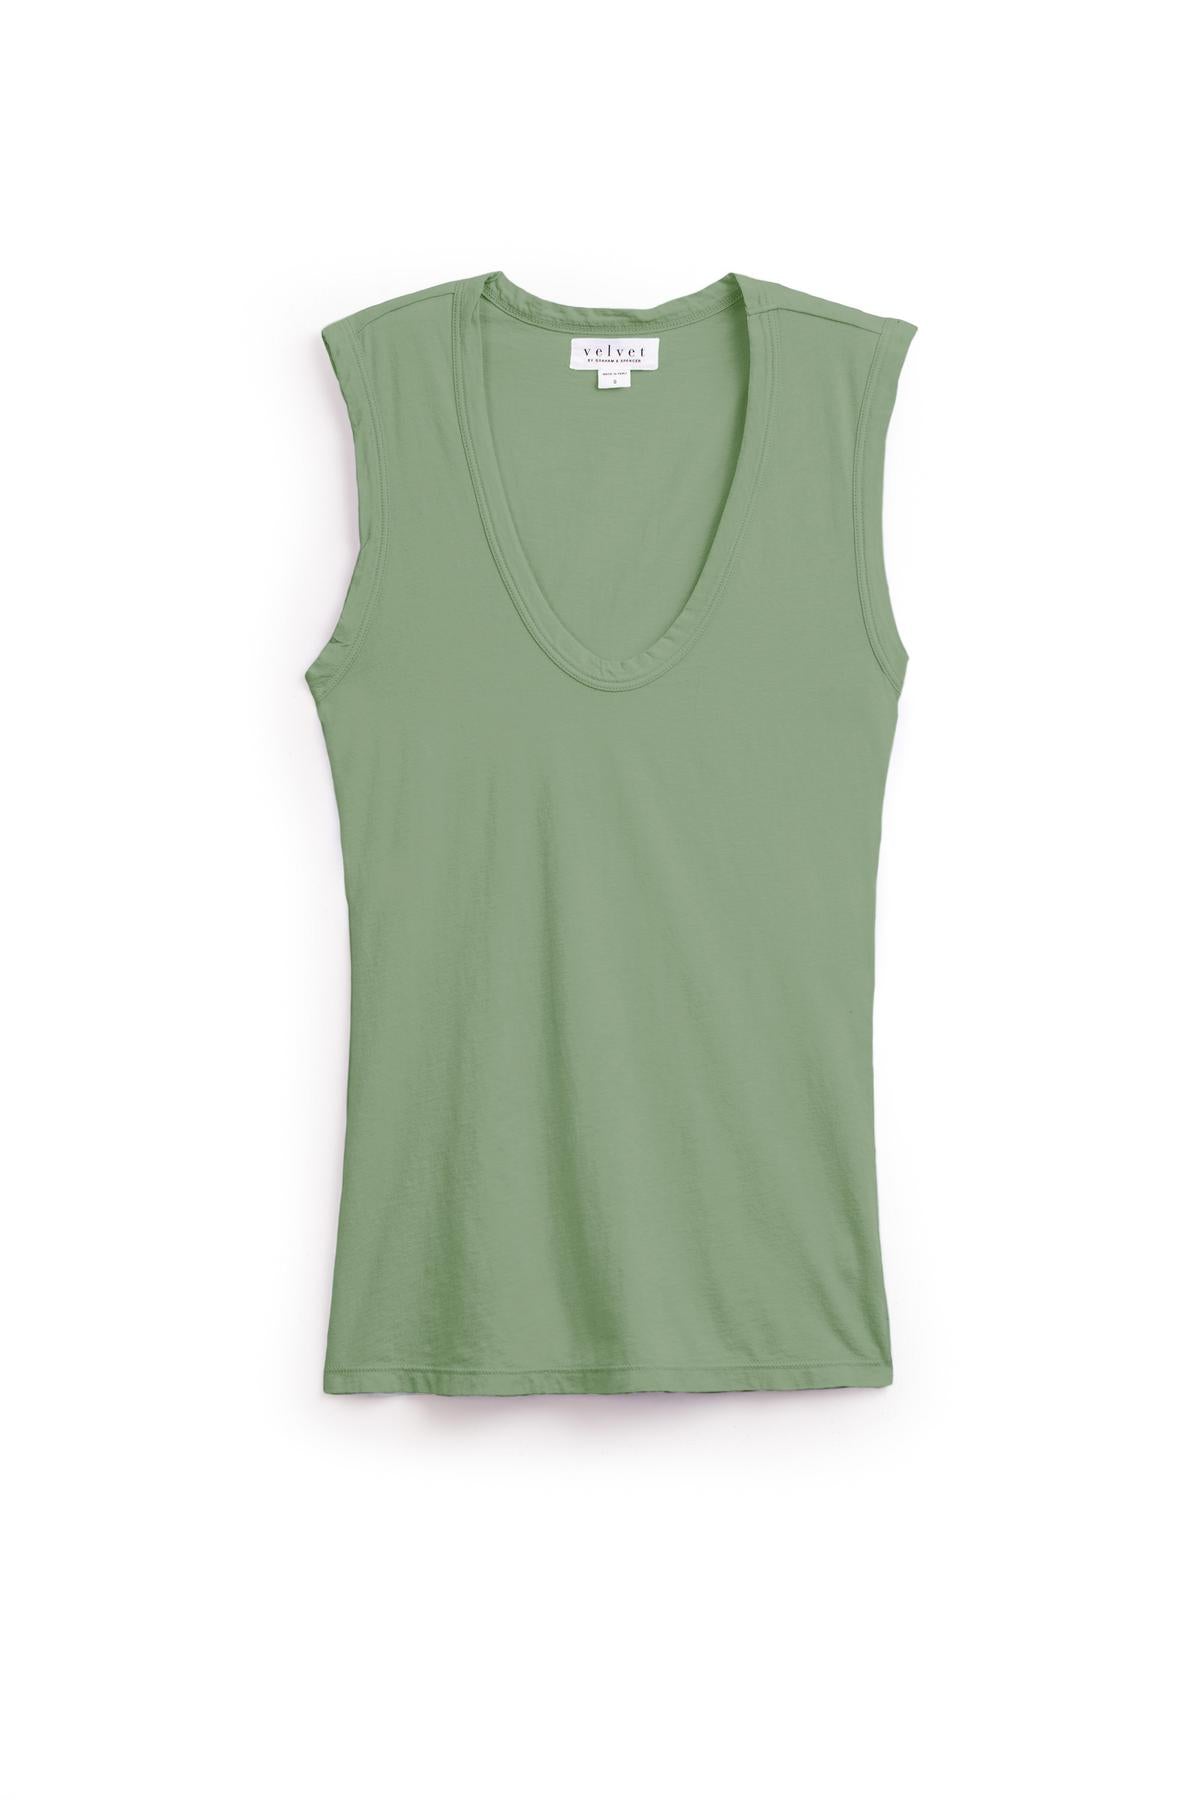   A sleeveless, sage green Velvet by Graham & Spencer ESTINA TANK TOP with a deep low-scoop-neck, crafted from soft gauzy whisper fabric, displayed against a white background. 